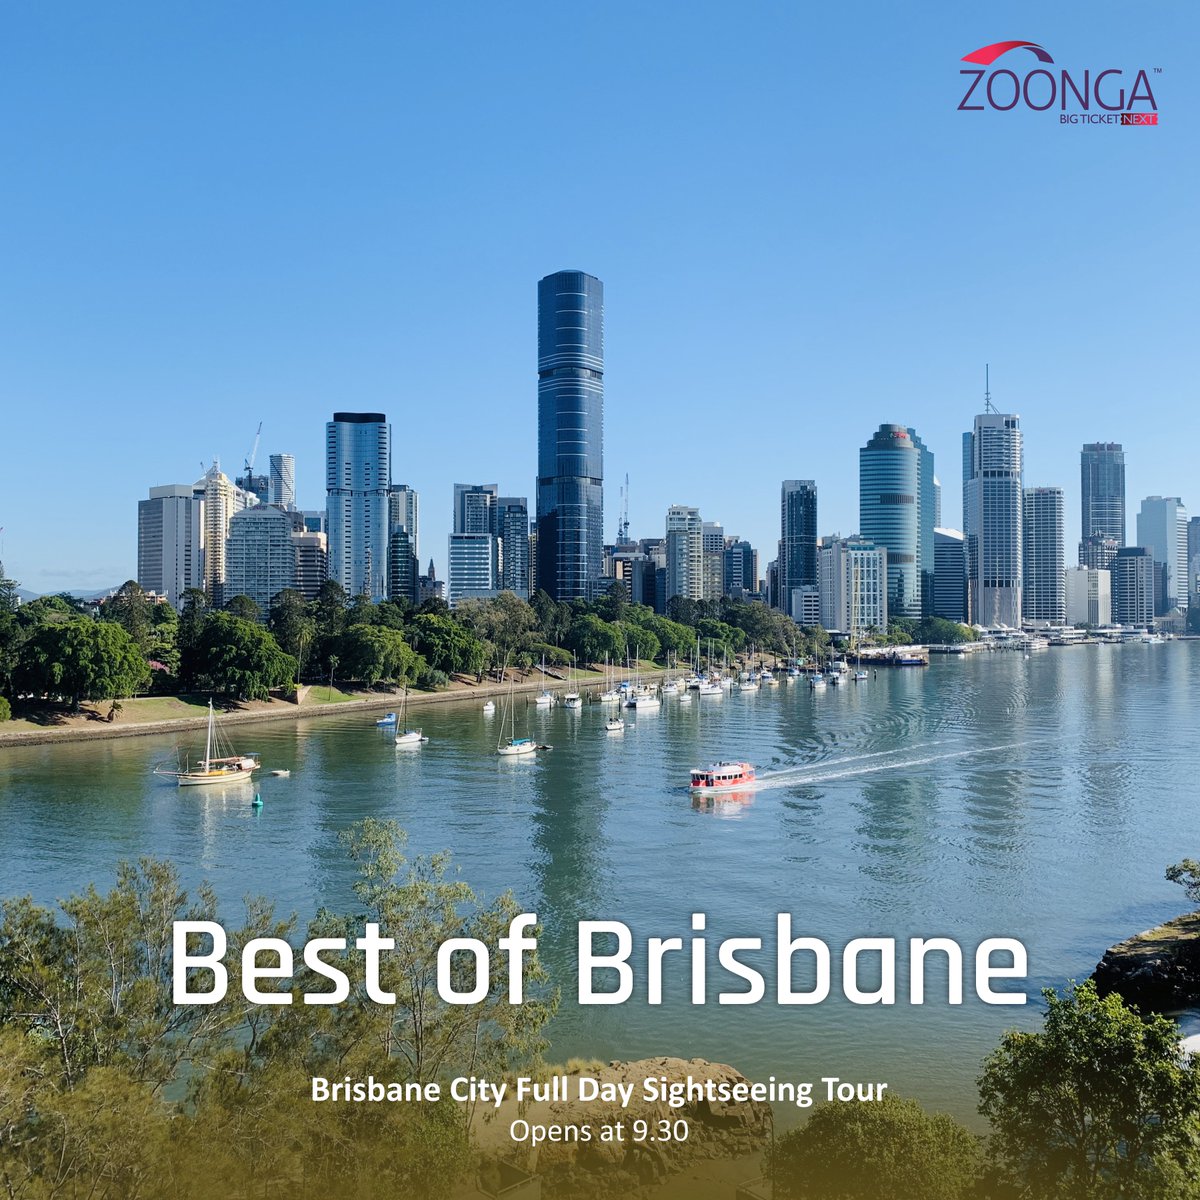 on Twitter: "Spend entire day touring this iconic Australian city. Known to have the best weather all year round, Brisbane is a you can visit anytime. book your